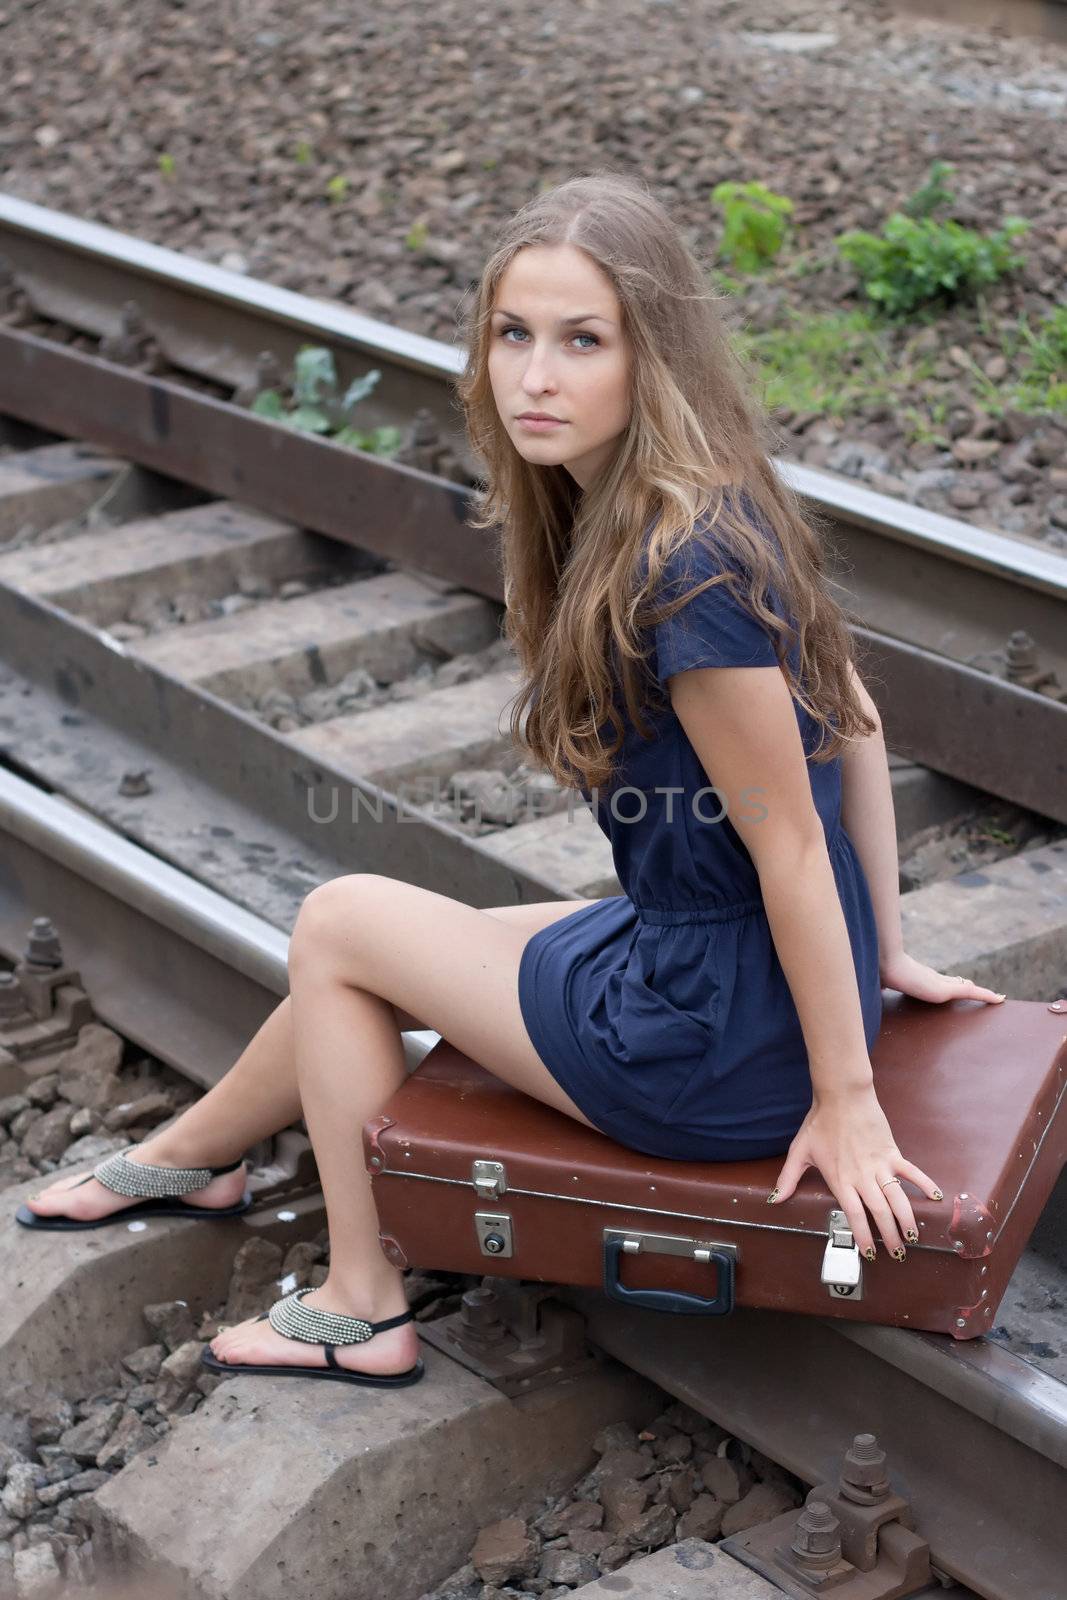 Woman sitting on rails outdoors shooting